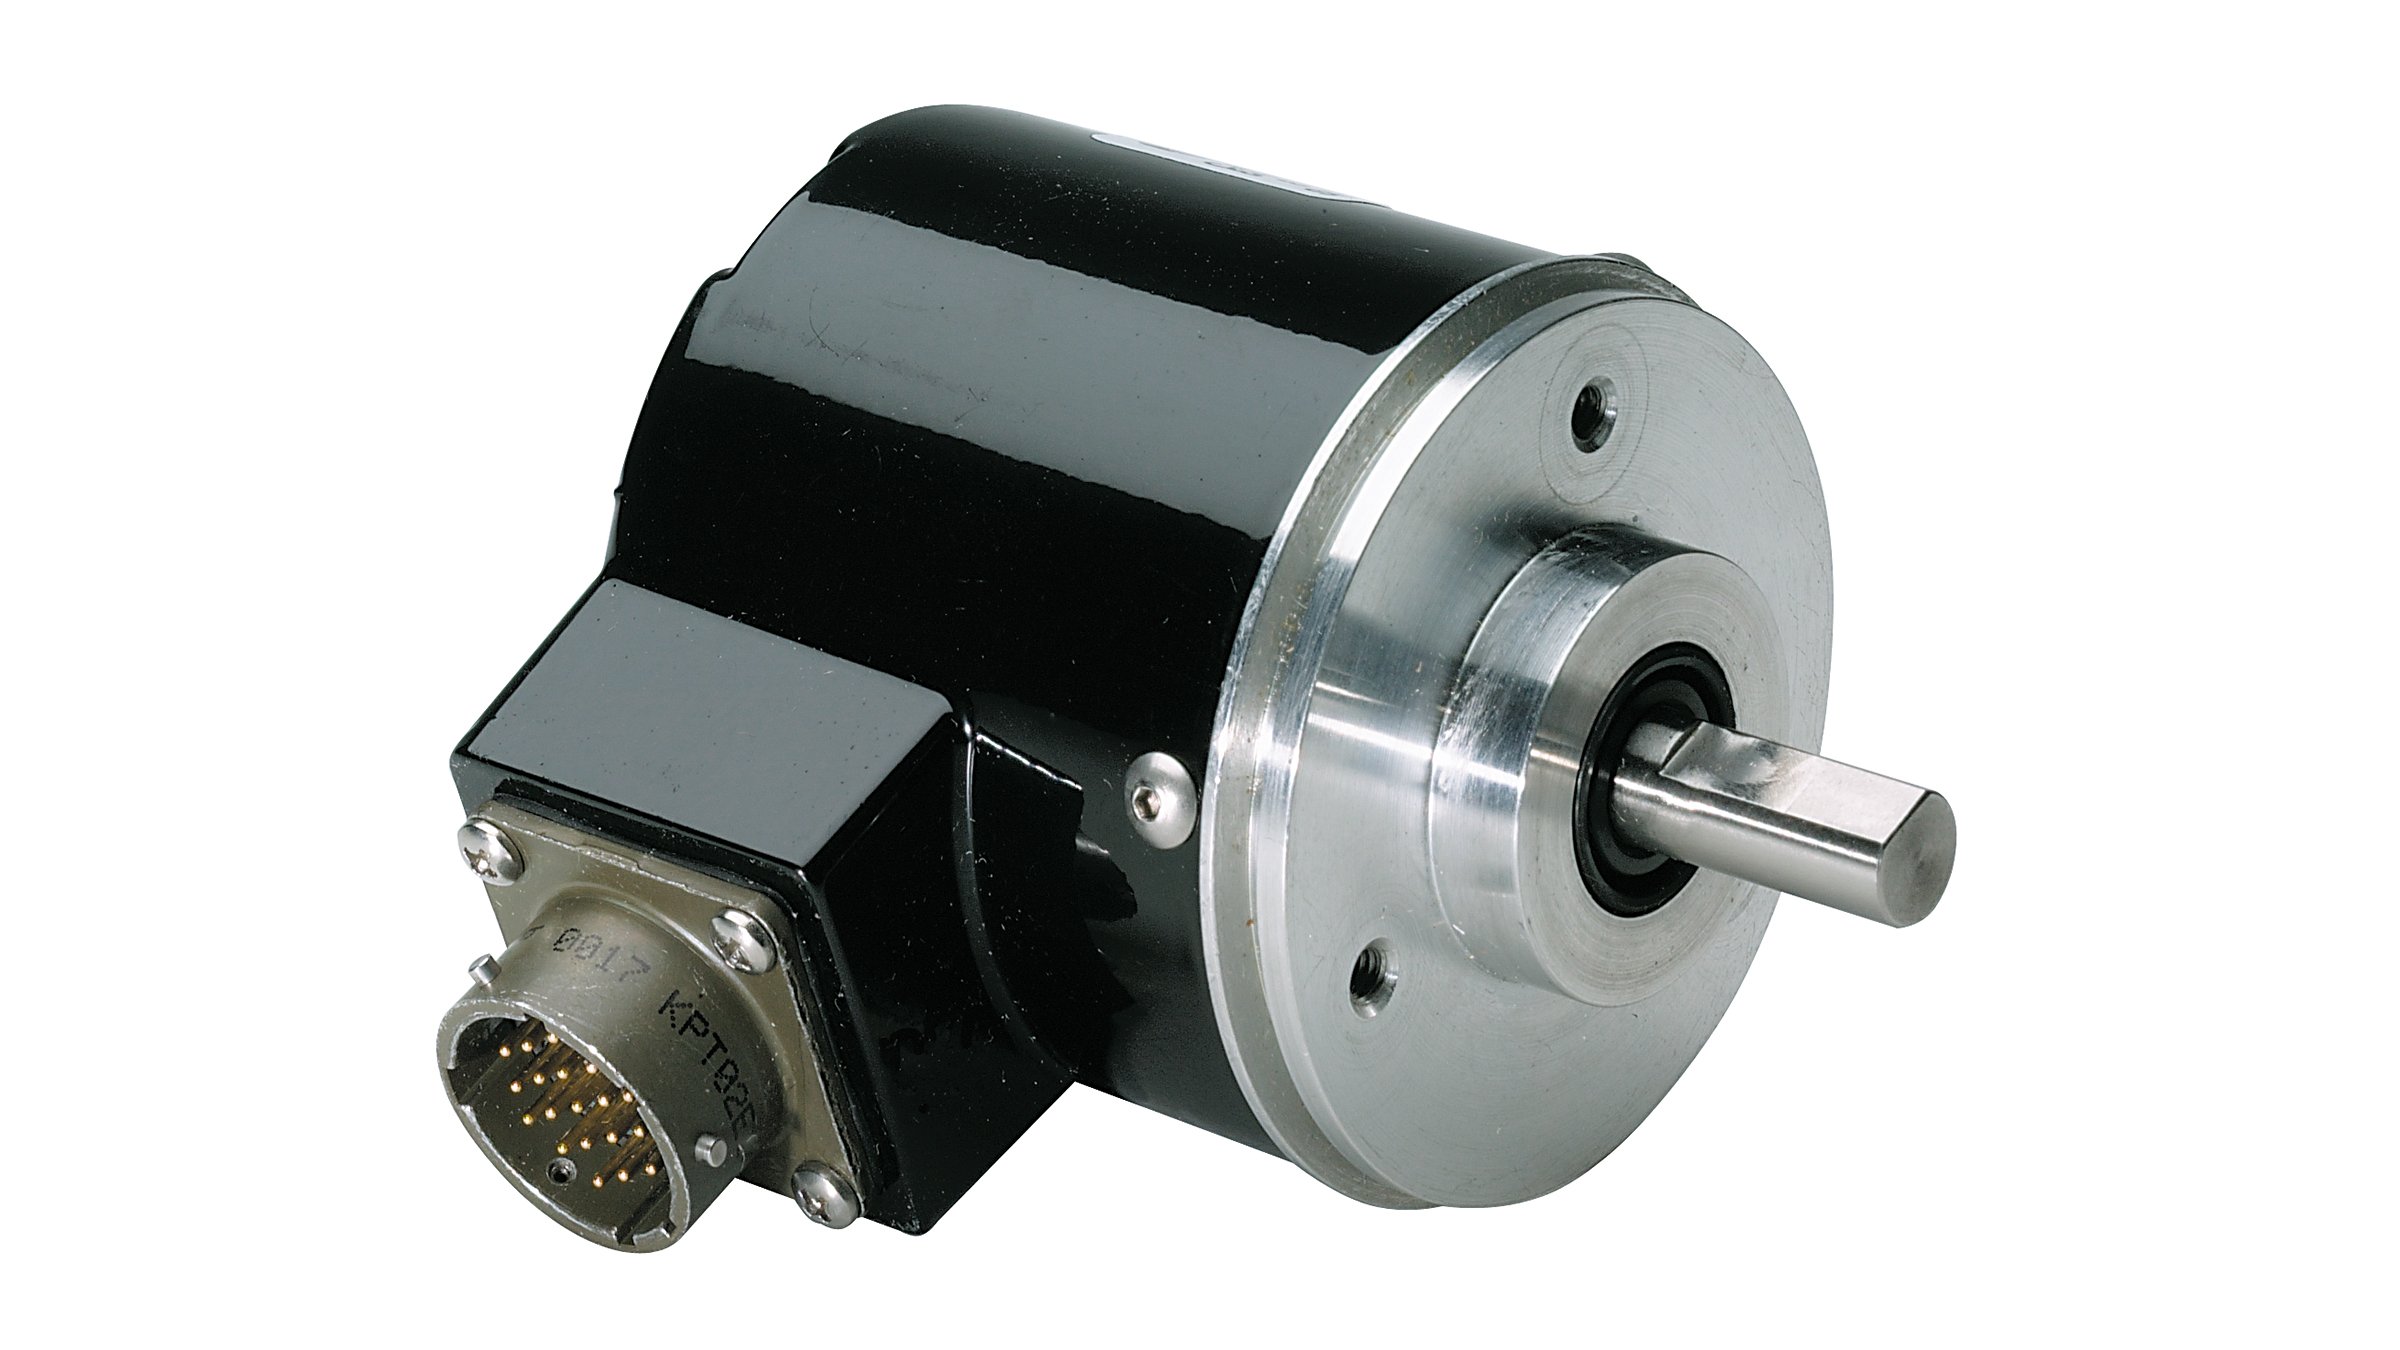 Allen‑Bradley Bulletin 845G Single-turn is a NEMA Type 4 and 13, single-turn absolute encoder for use in harsh conditions.